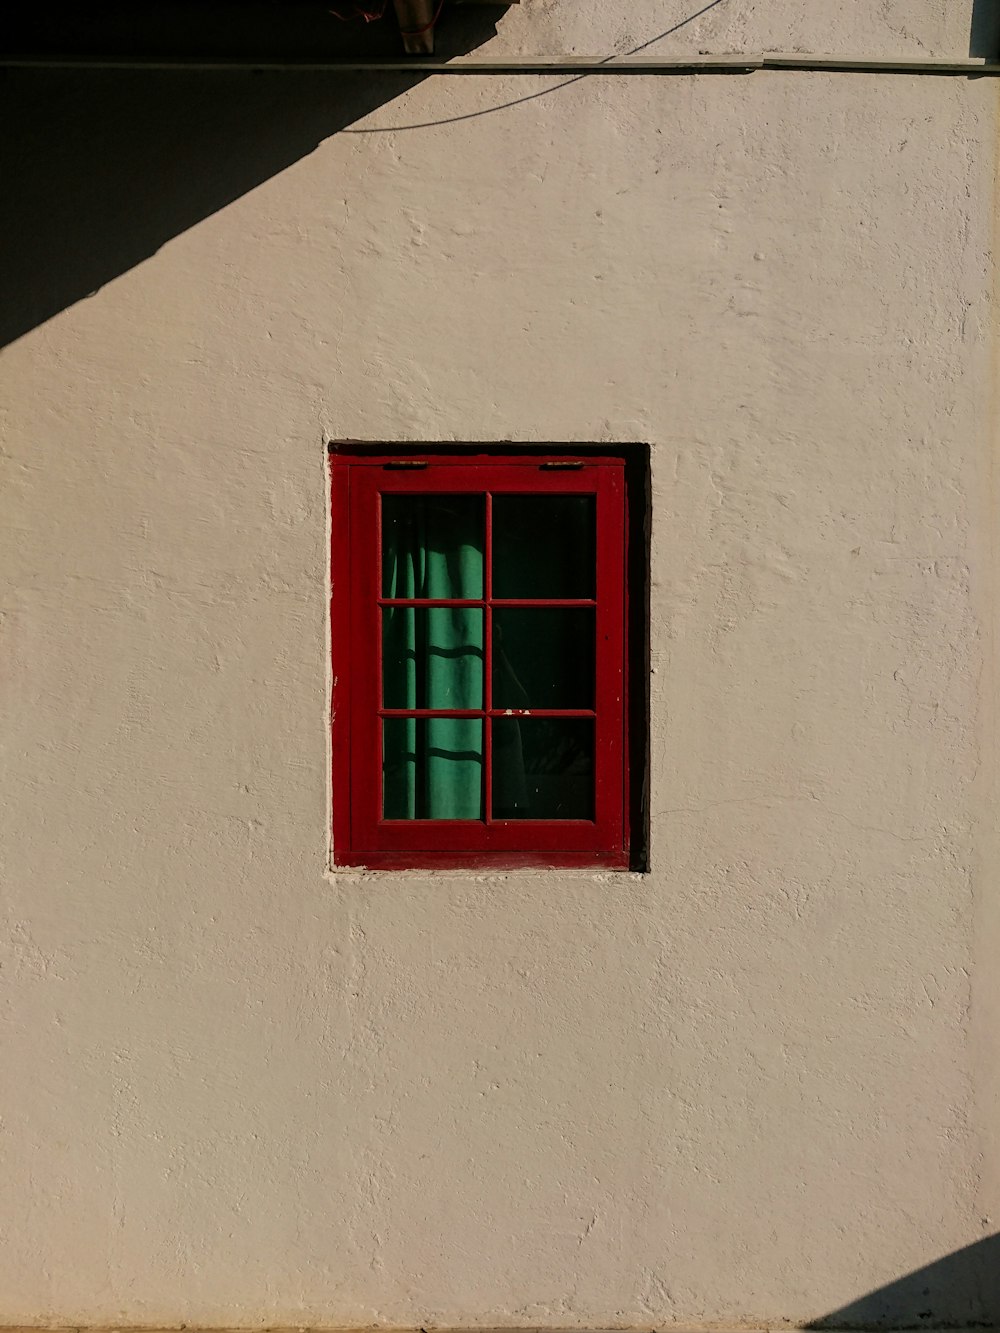 a white building with a red window and a green curtain